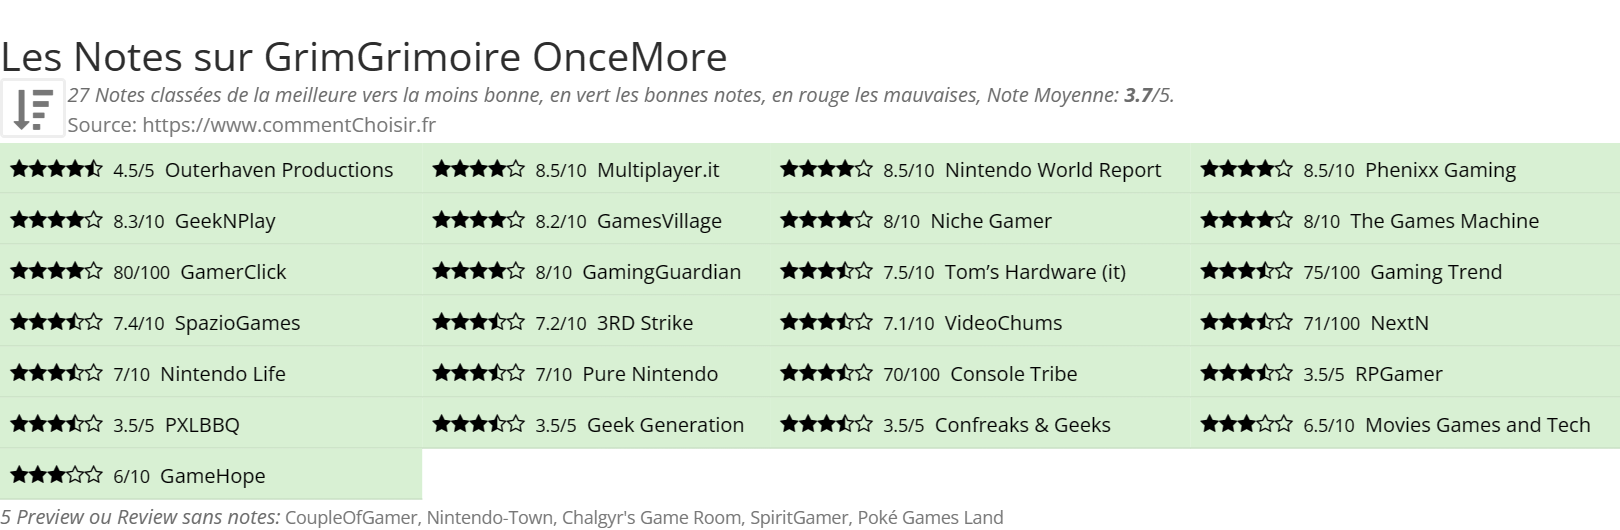 Ratings GrimGrimoire OnceMore